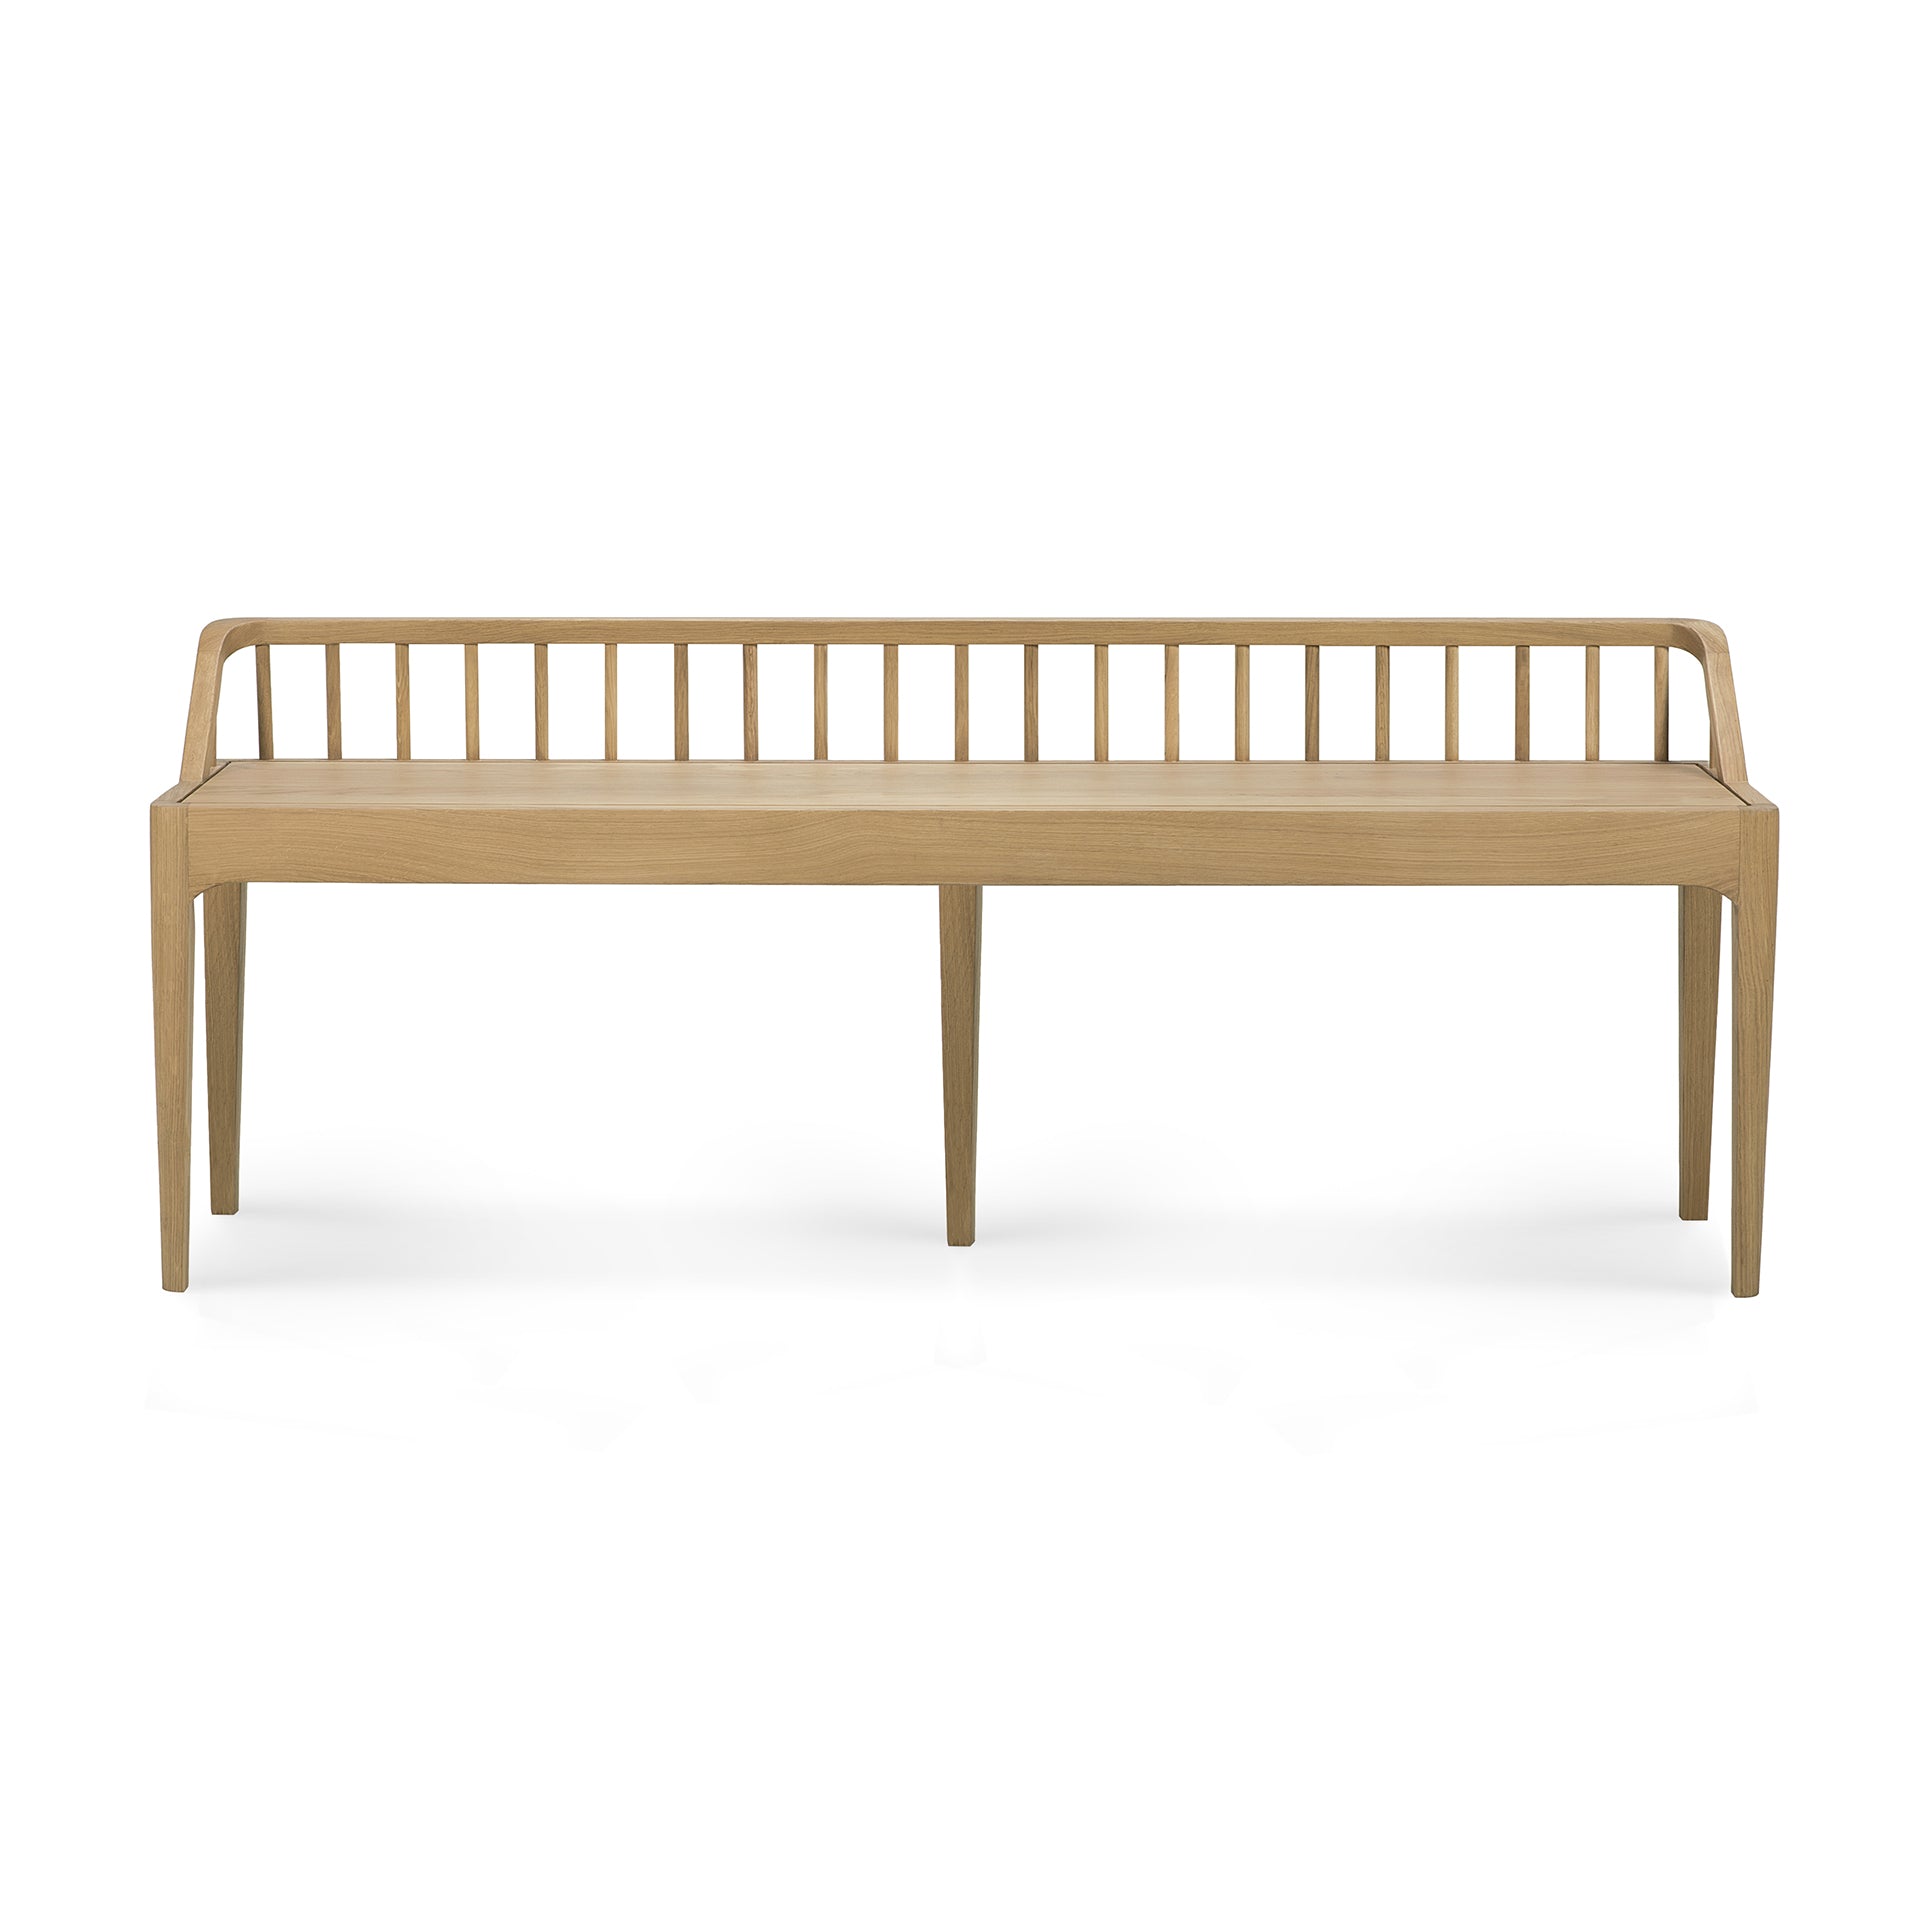 Ethnicraft Oak Spindle Bench Seat is available from Make Your House A Home, Bendigo, Victoria, Australia